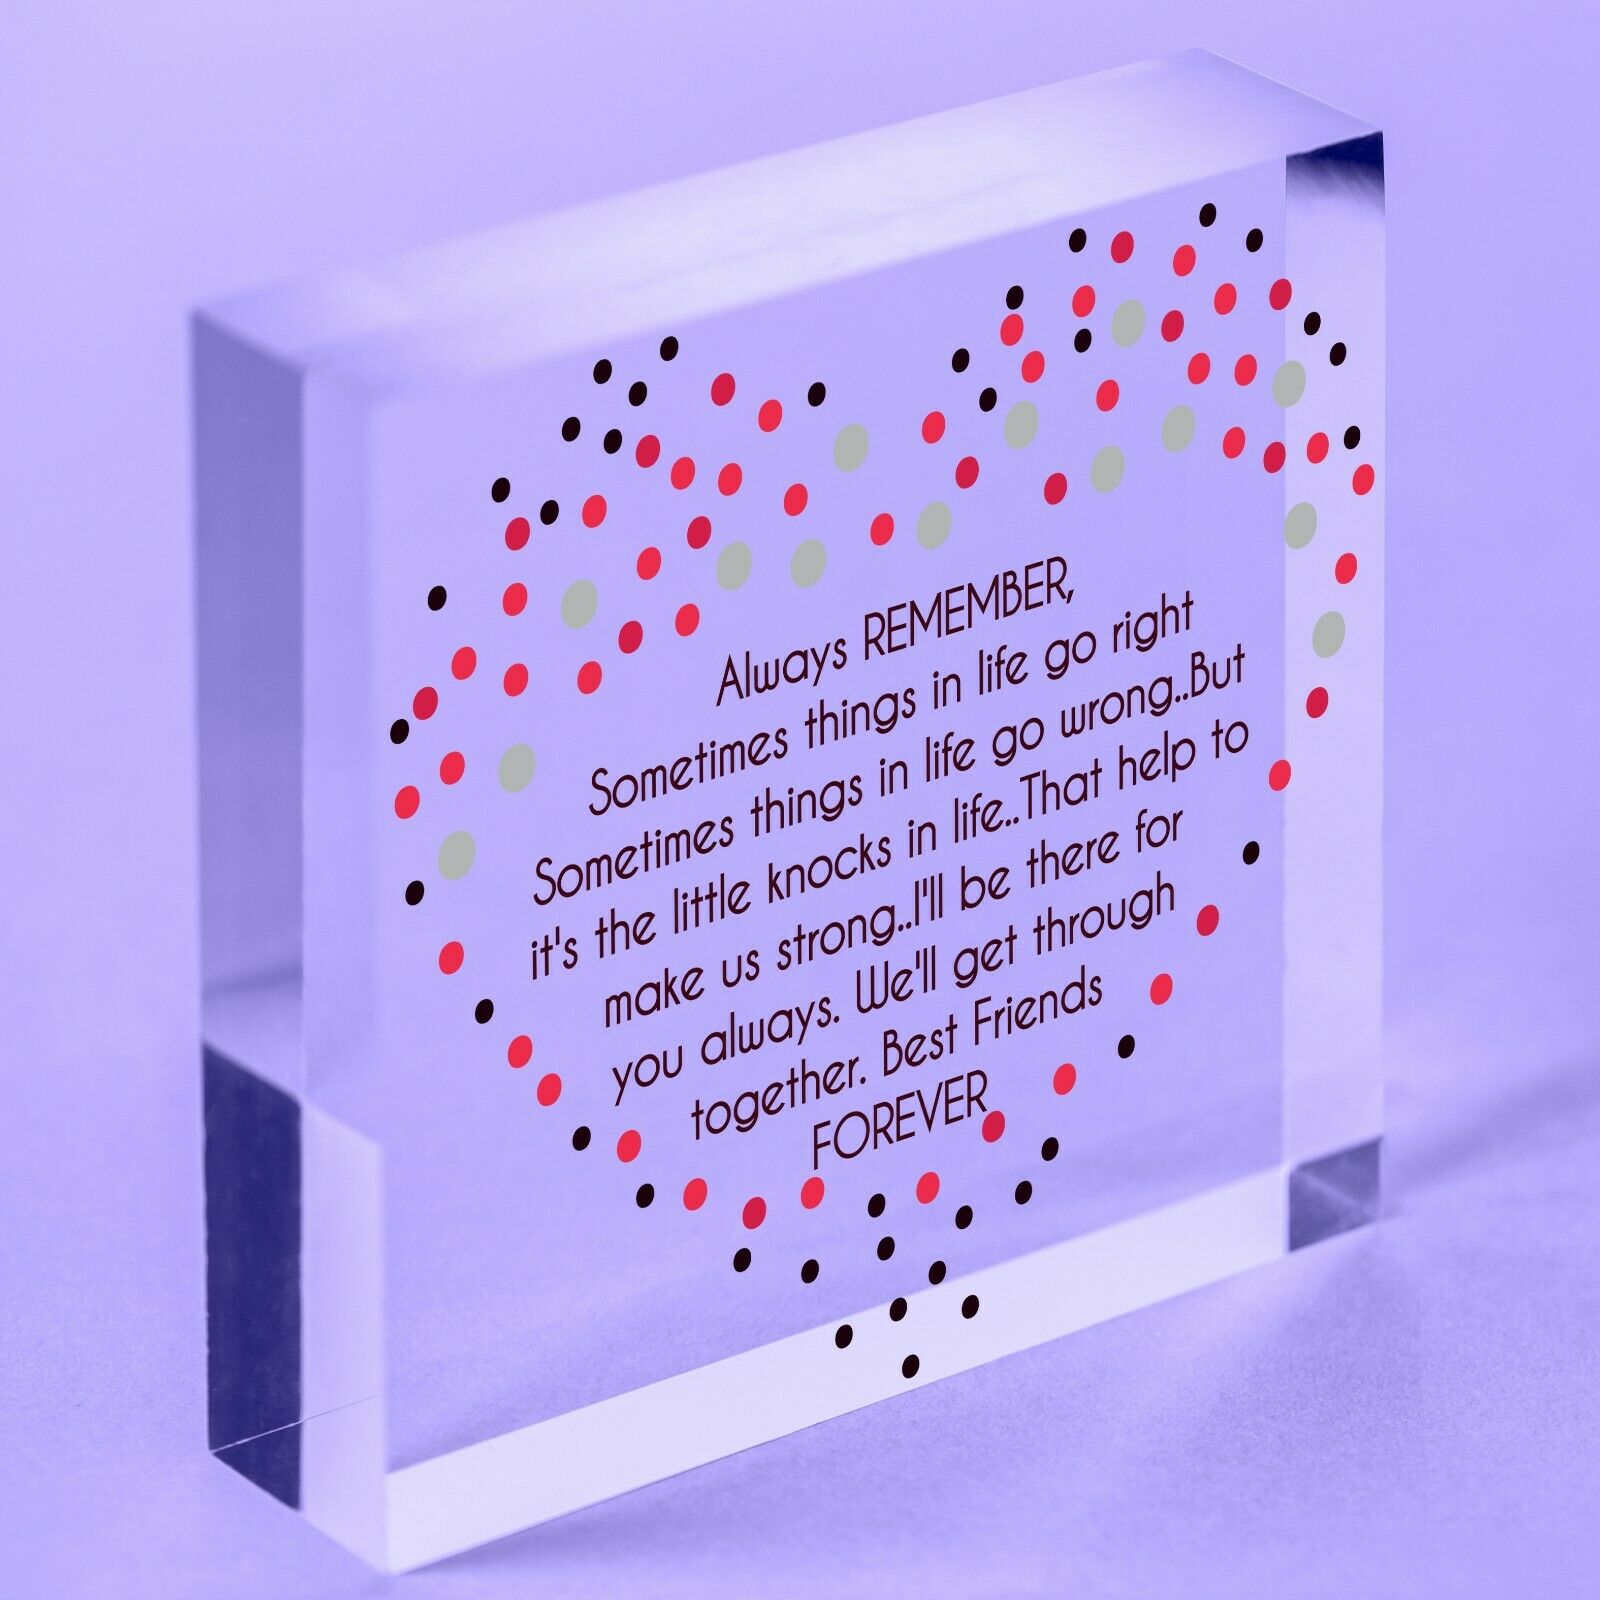 Chance Made Us School Acrylic Novelty Friendship Gift Plaque